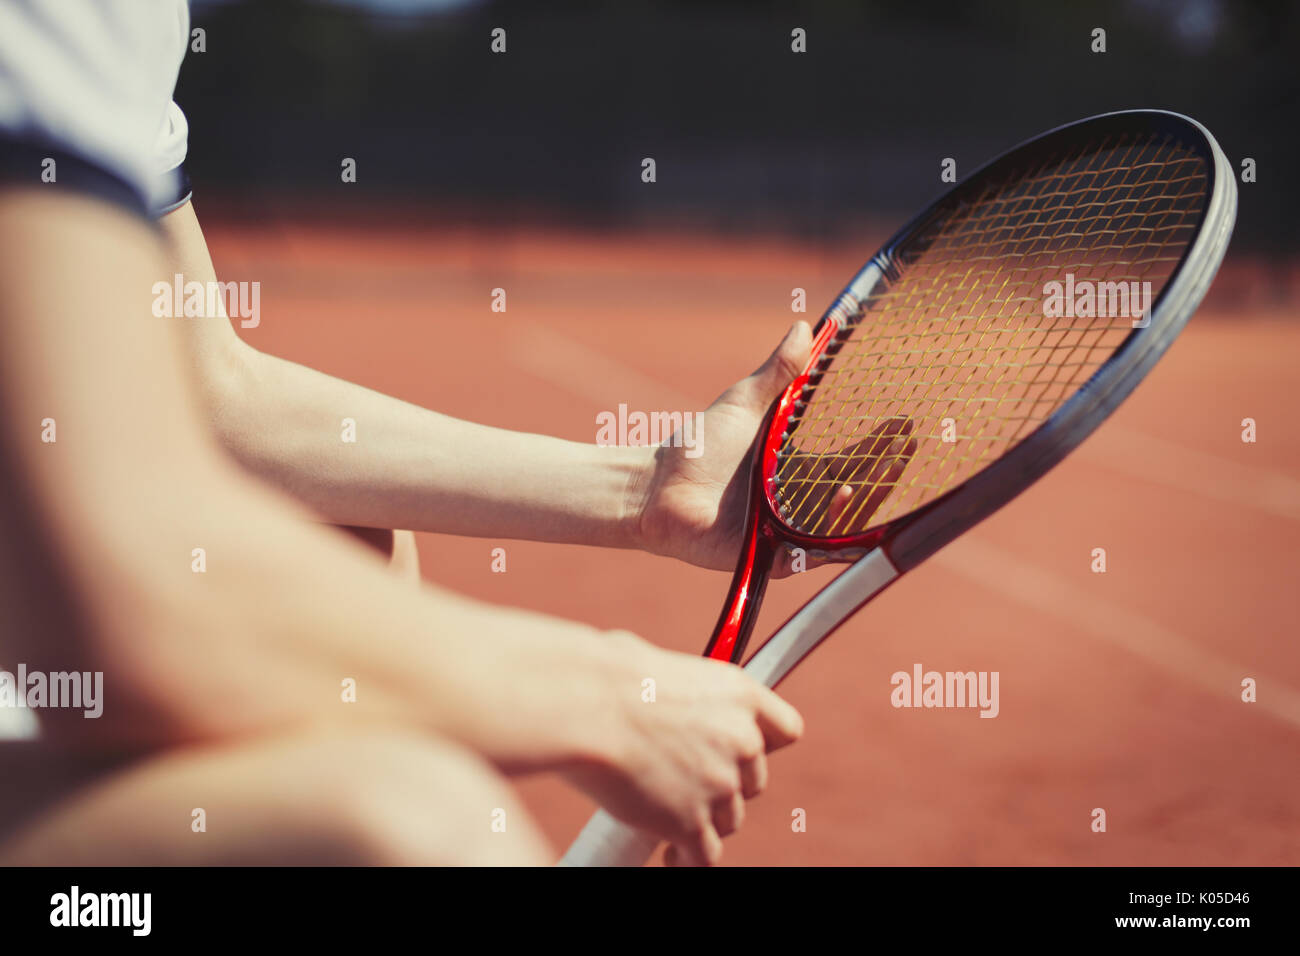 Young male tennis player holding tennis racket Banque D'Images